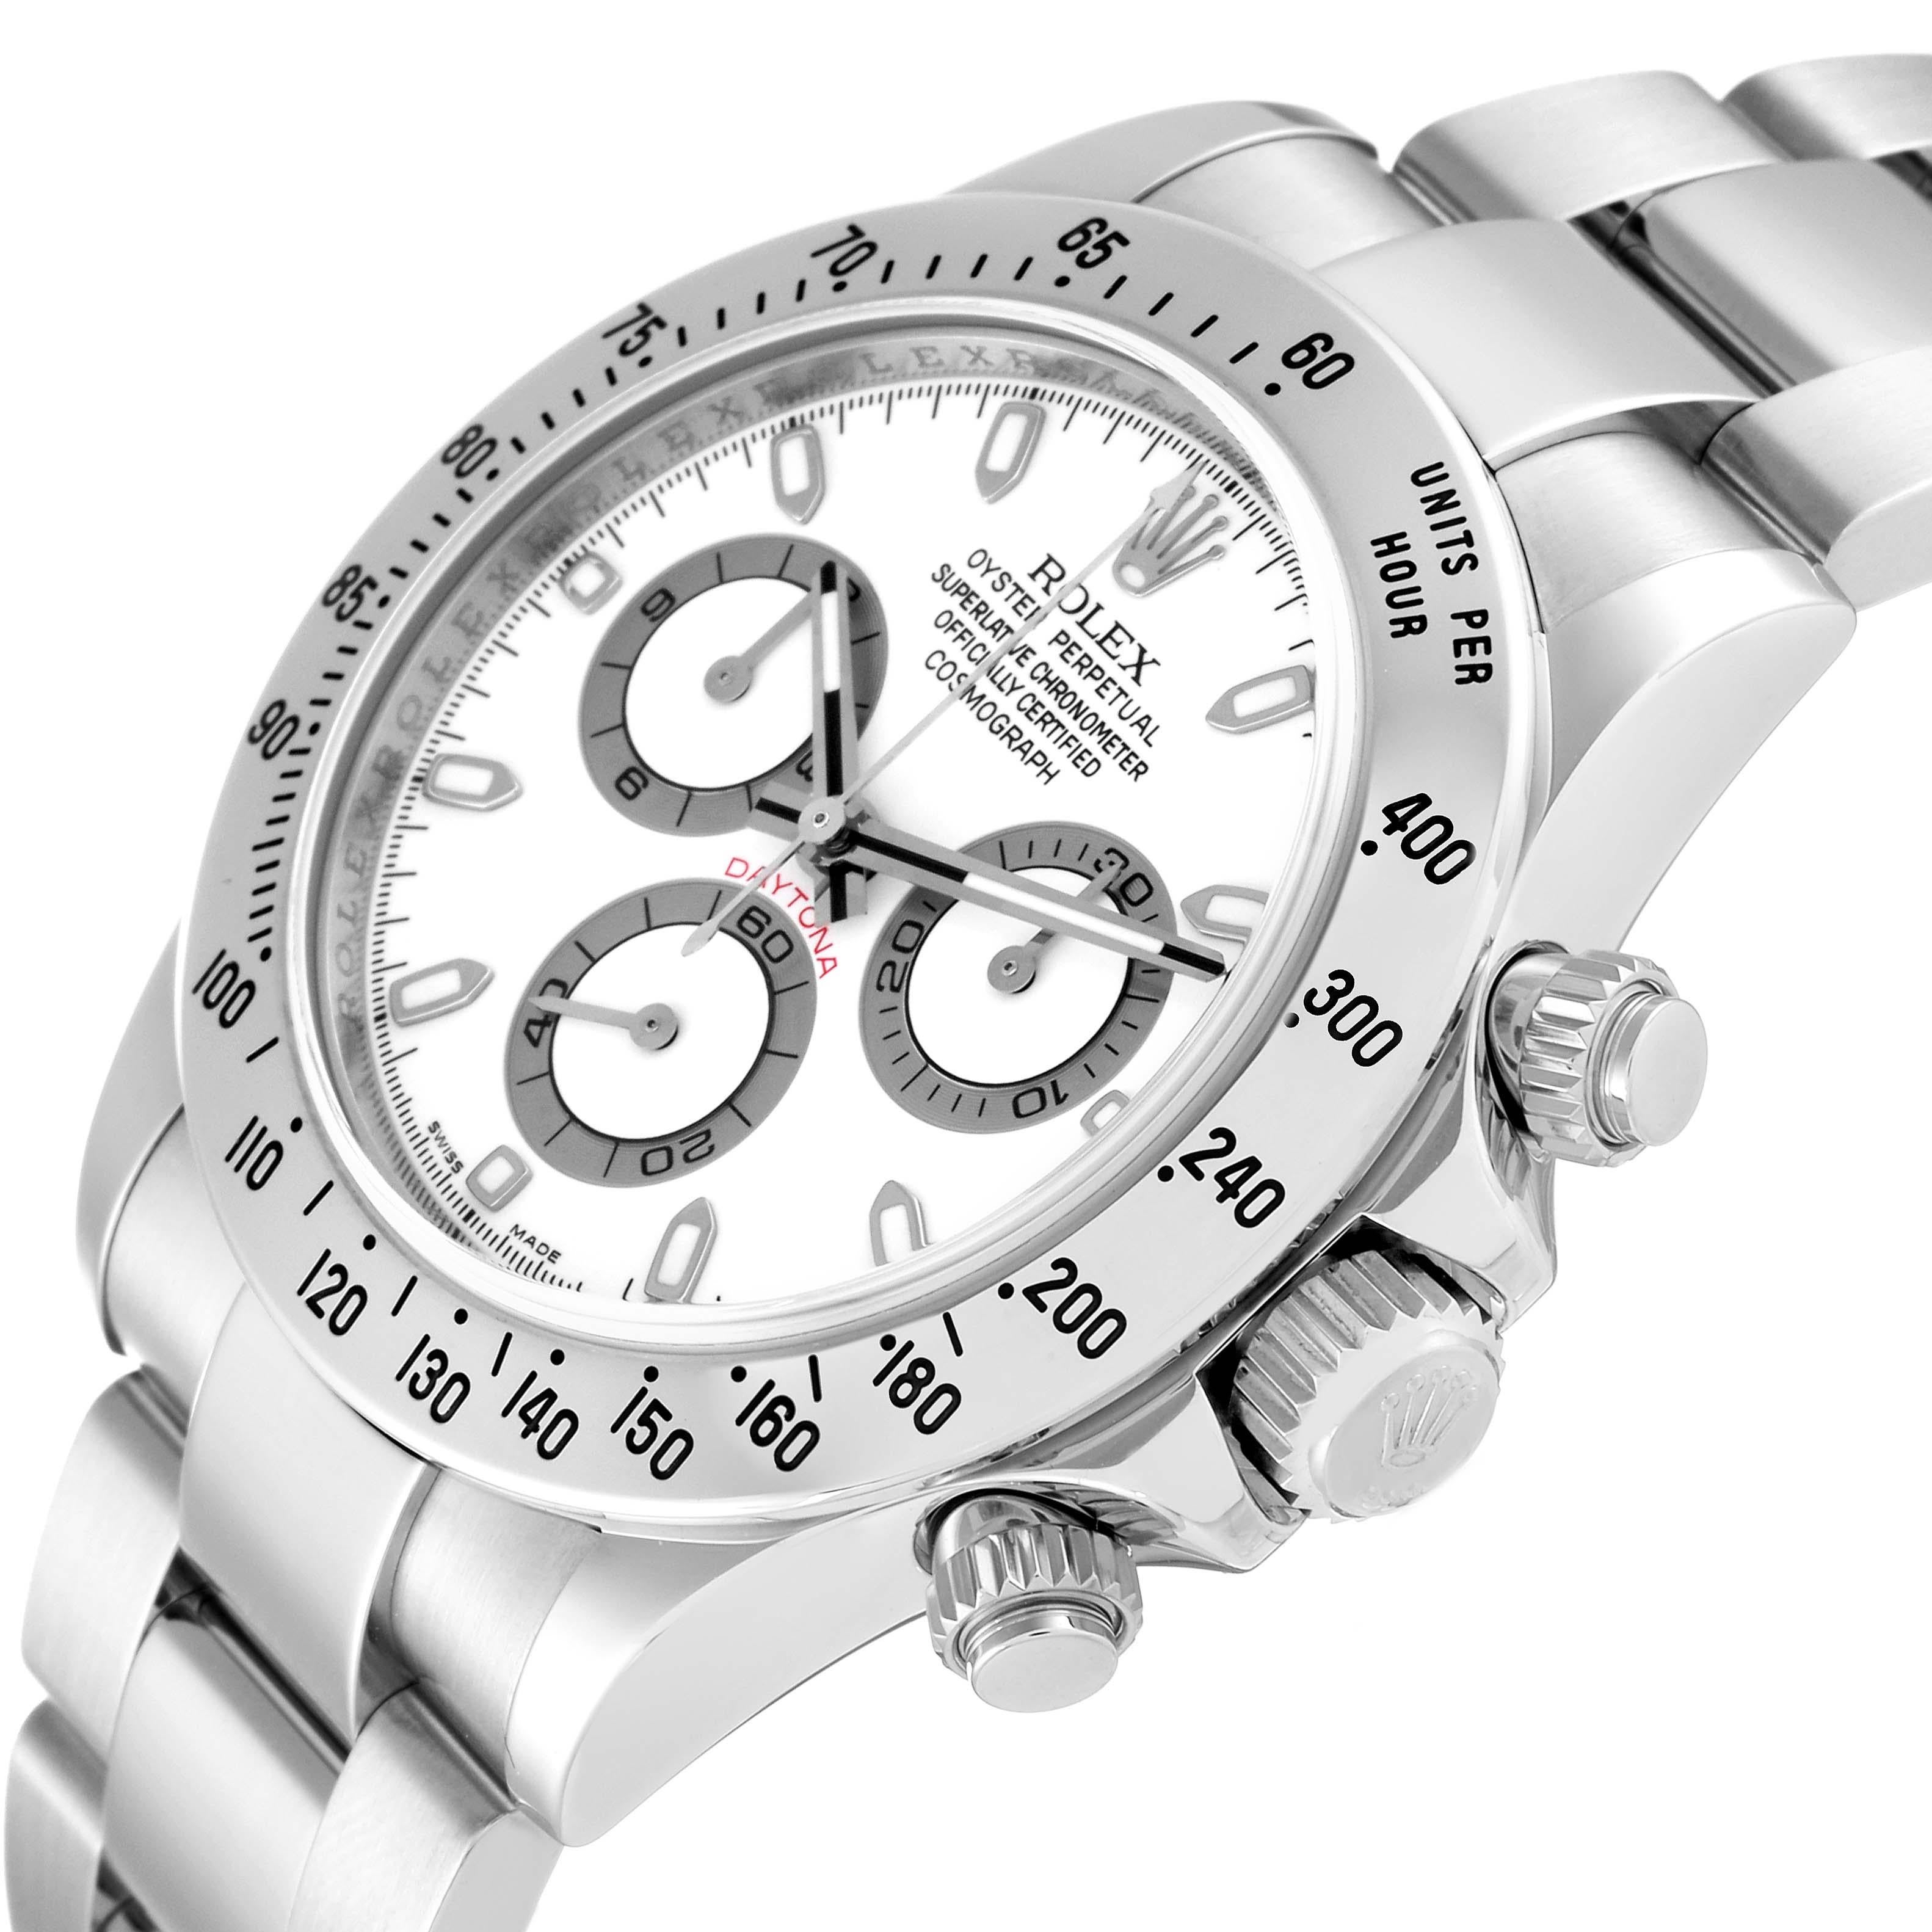 Rolex Daytona White Dial Chronograph Steel Mens Watch 116520 Box Card In Excellent Condition In Atlanta, GA